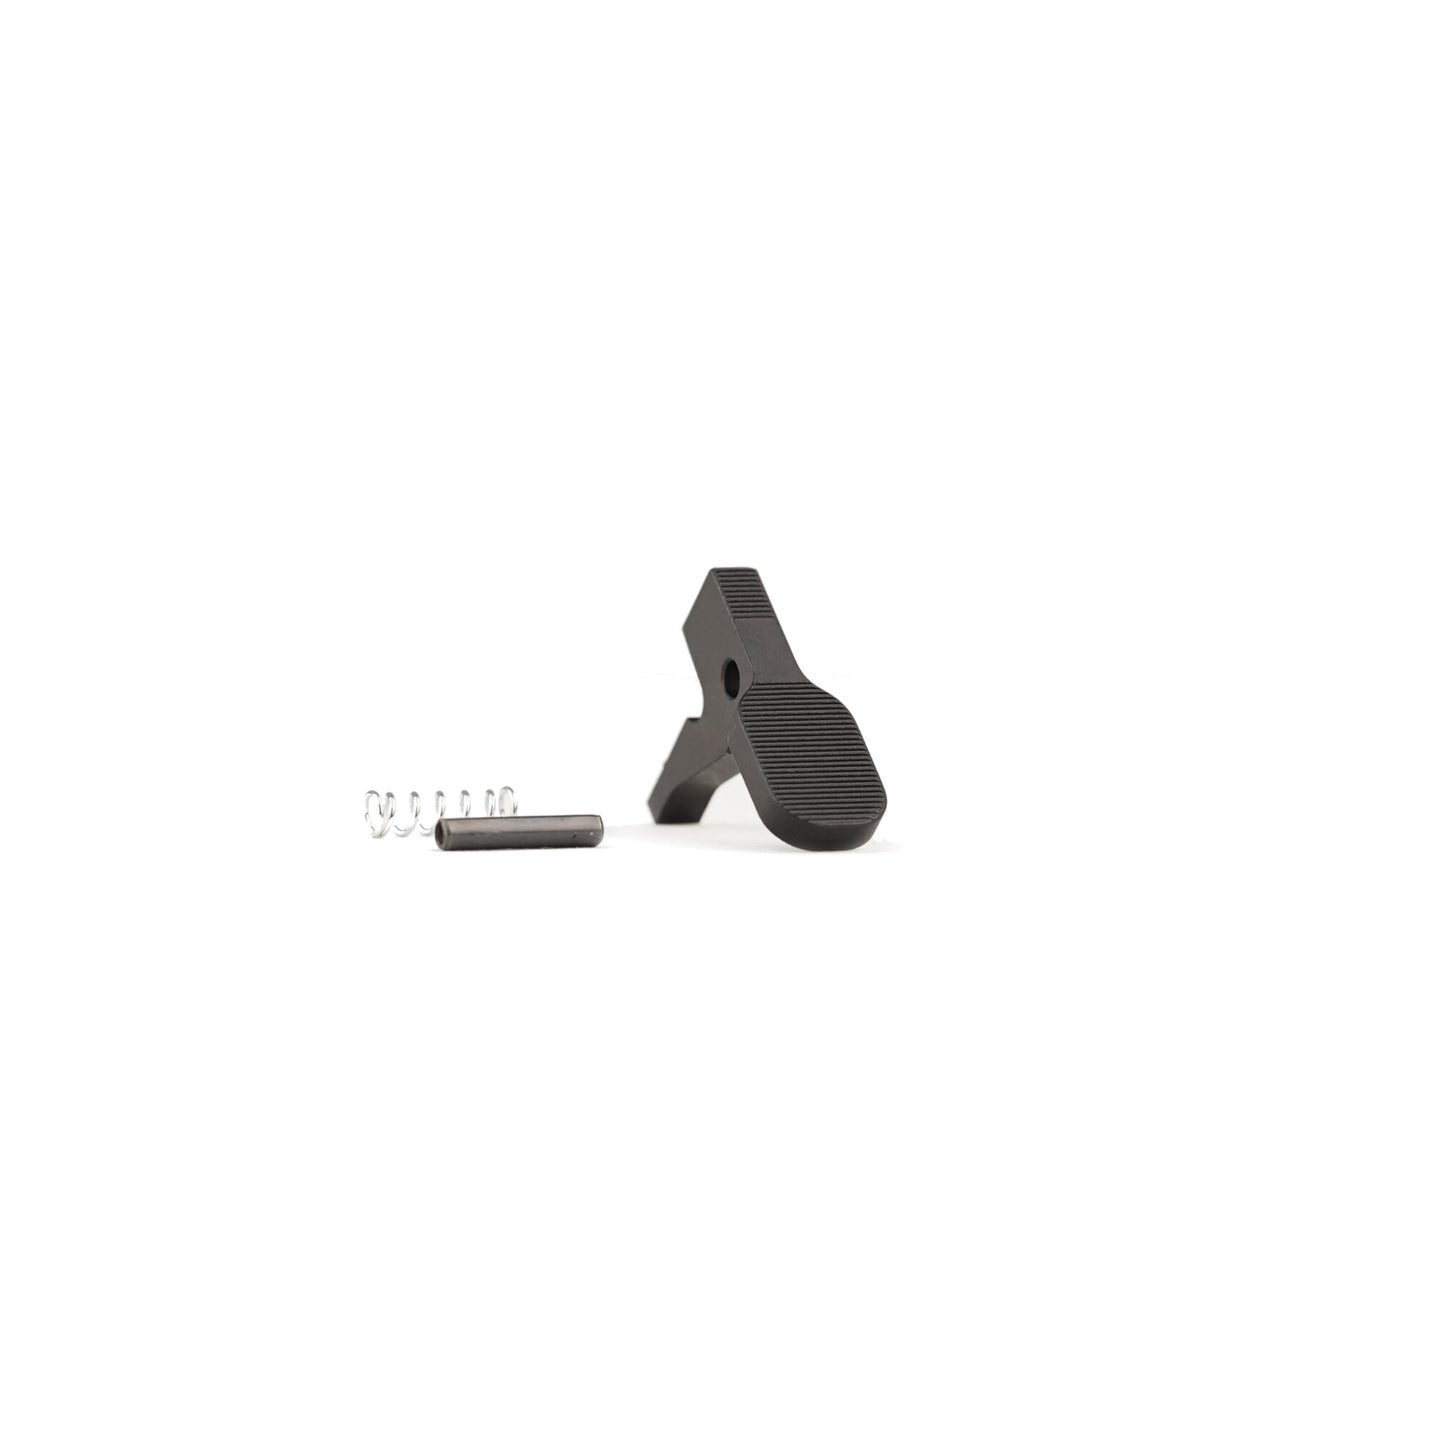 Wolverine Airsoft MTW Bolt Catch and pin